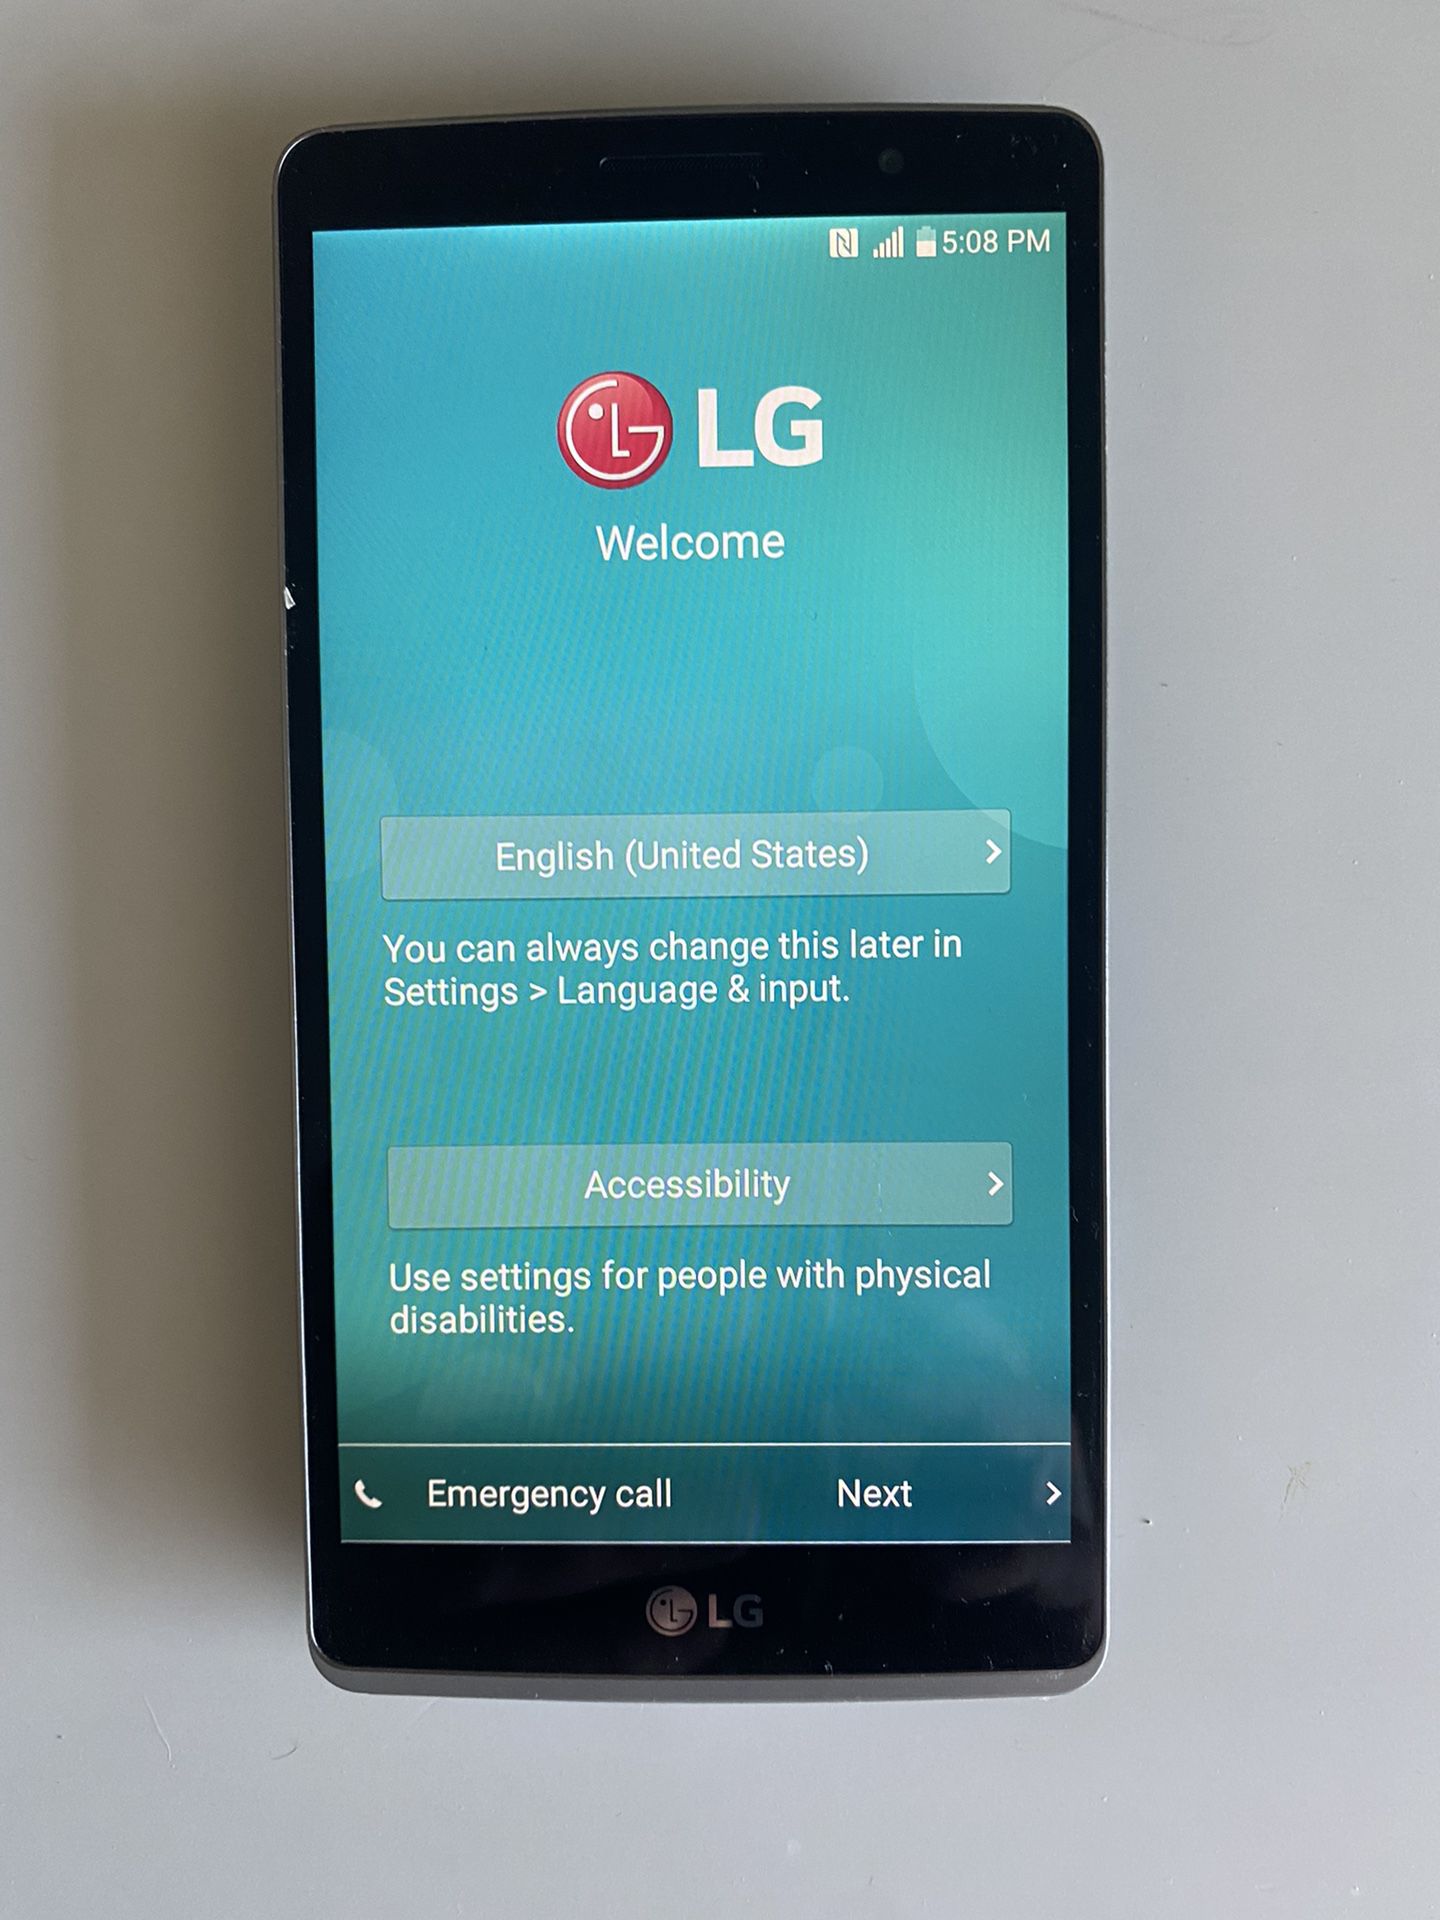 LG Android Phone Like New 